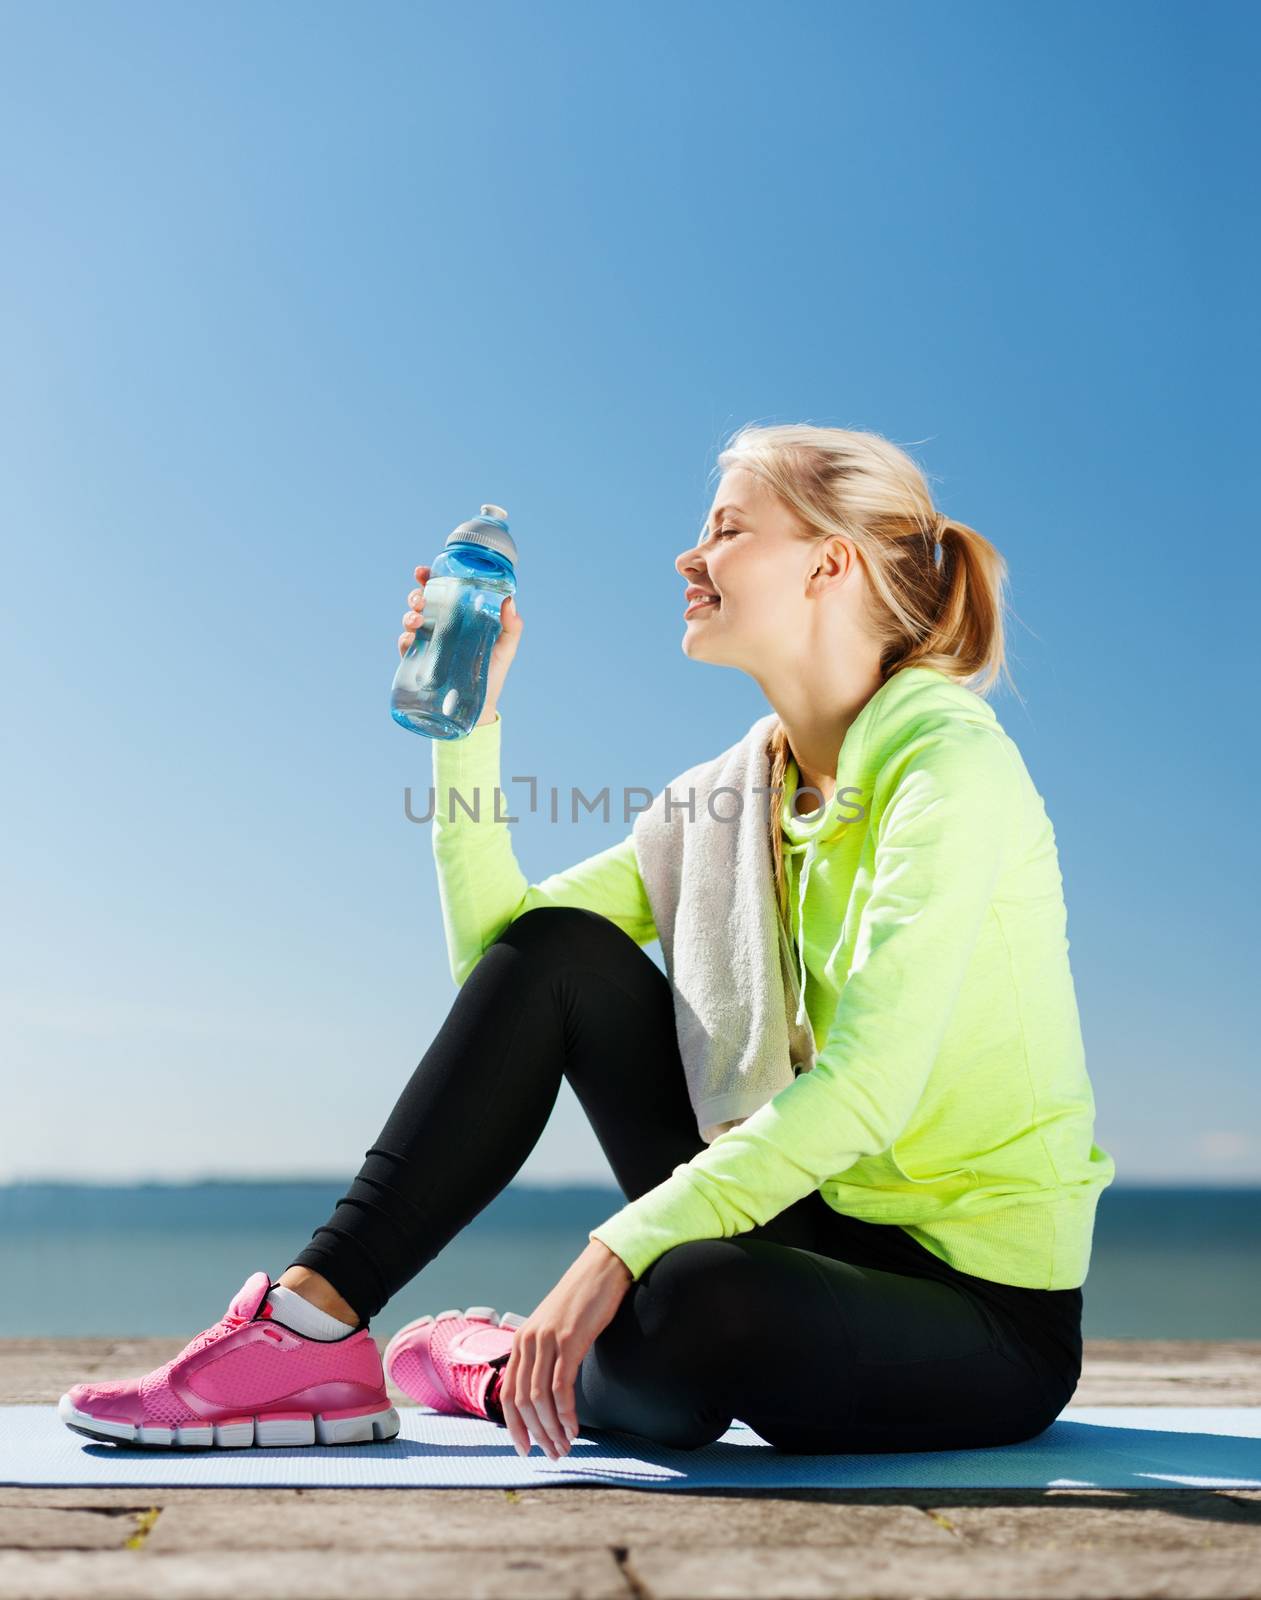 sport and lifestyle concept - woman drinking water after doing sports outdoors